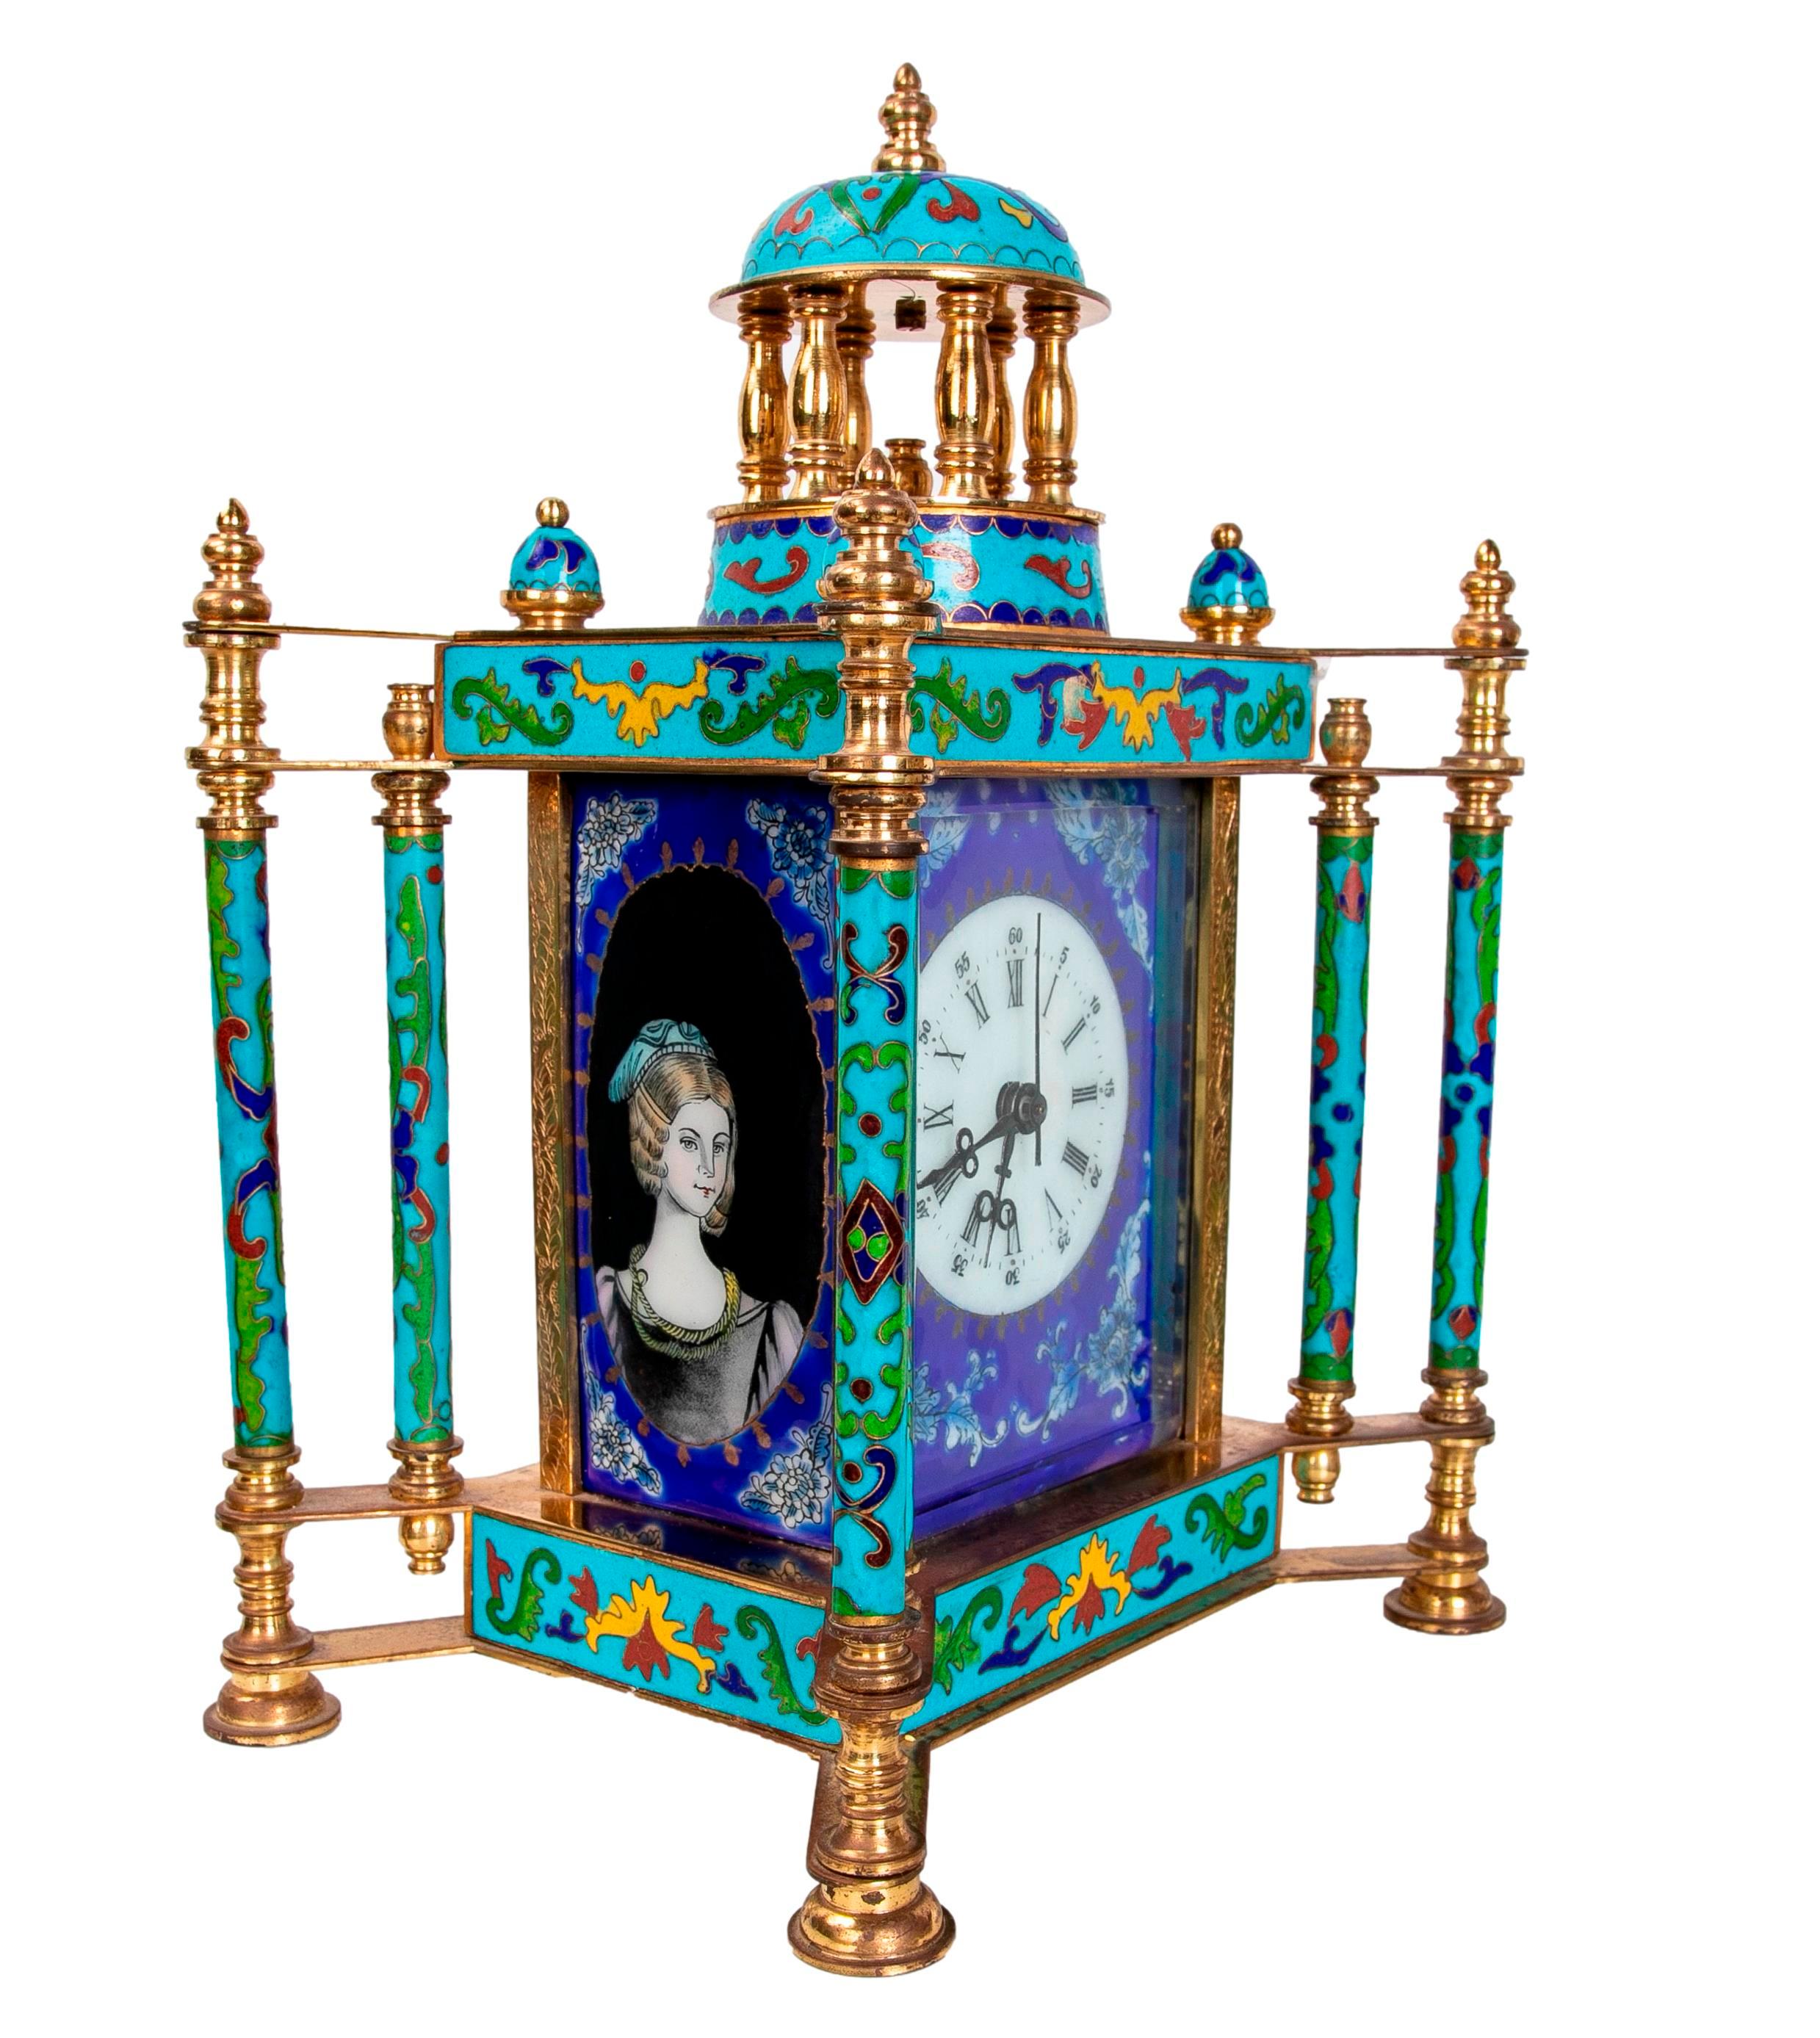 Gilded bronze table clock with cloisonne and porcelain decoration.